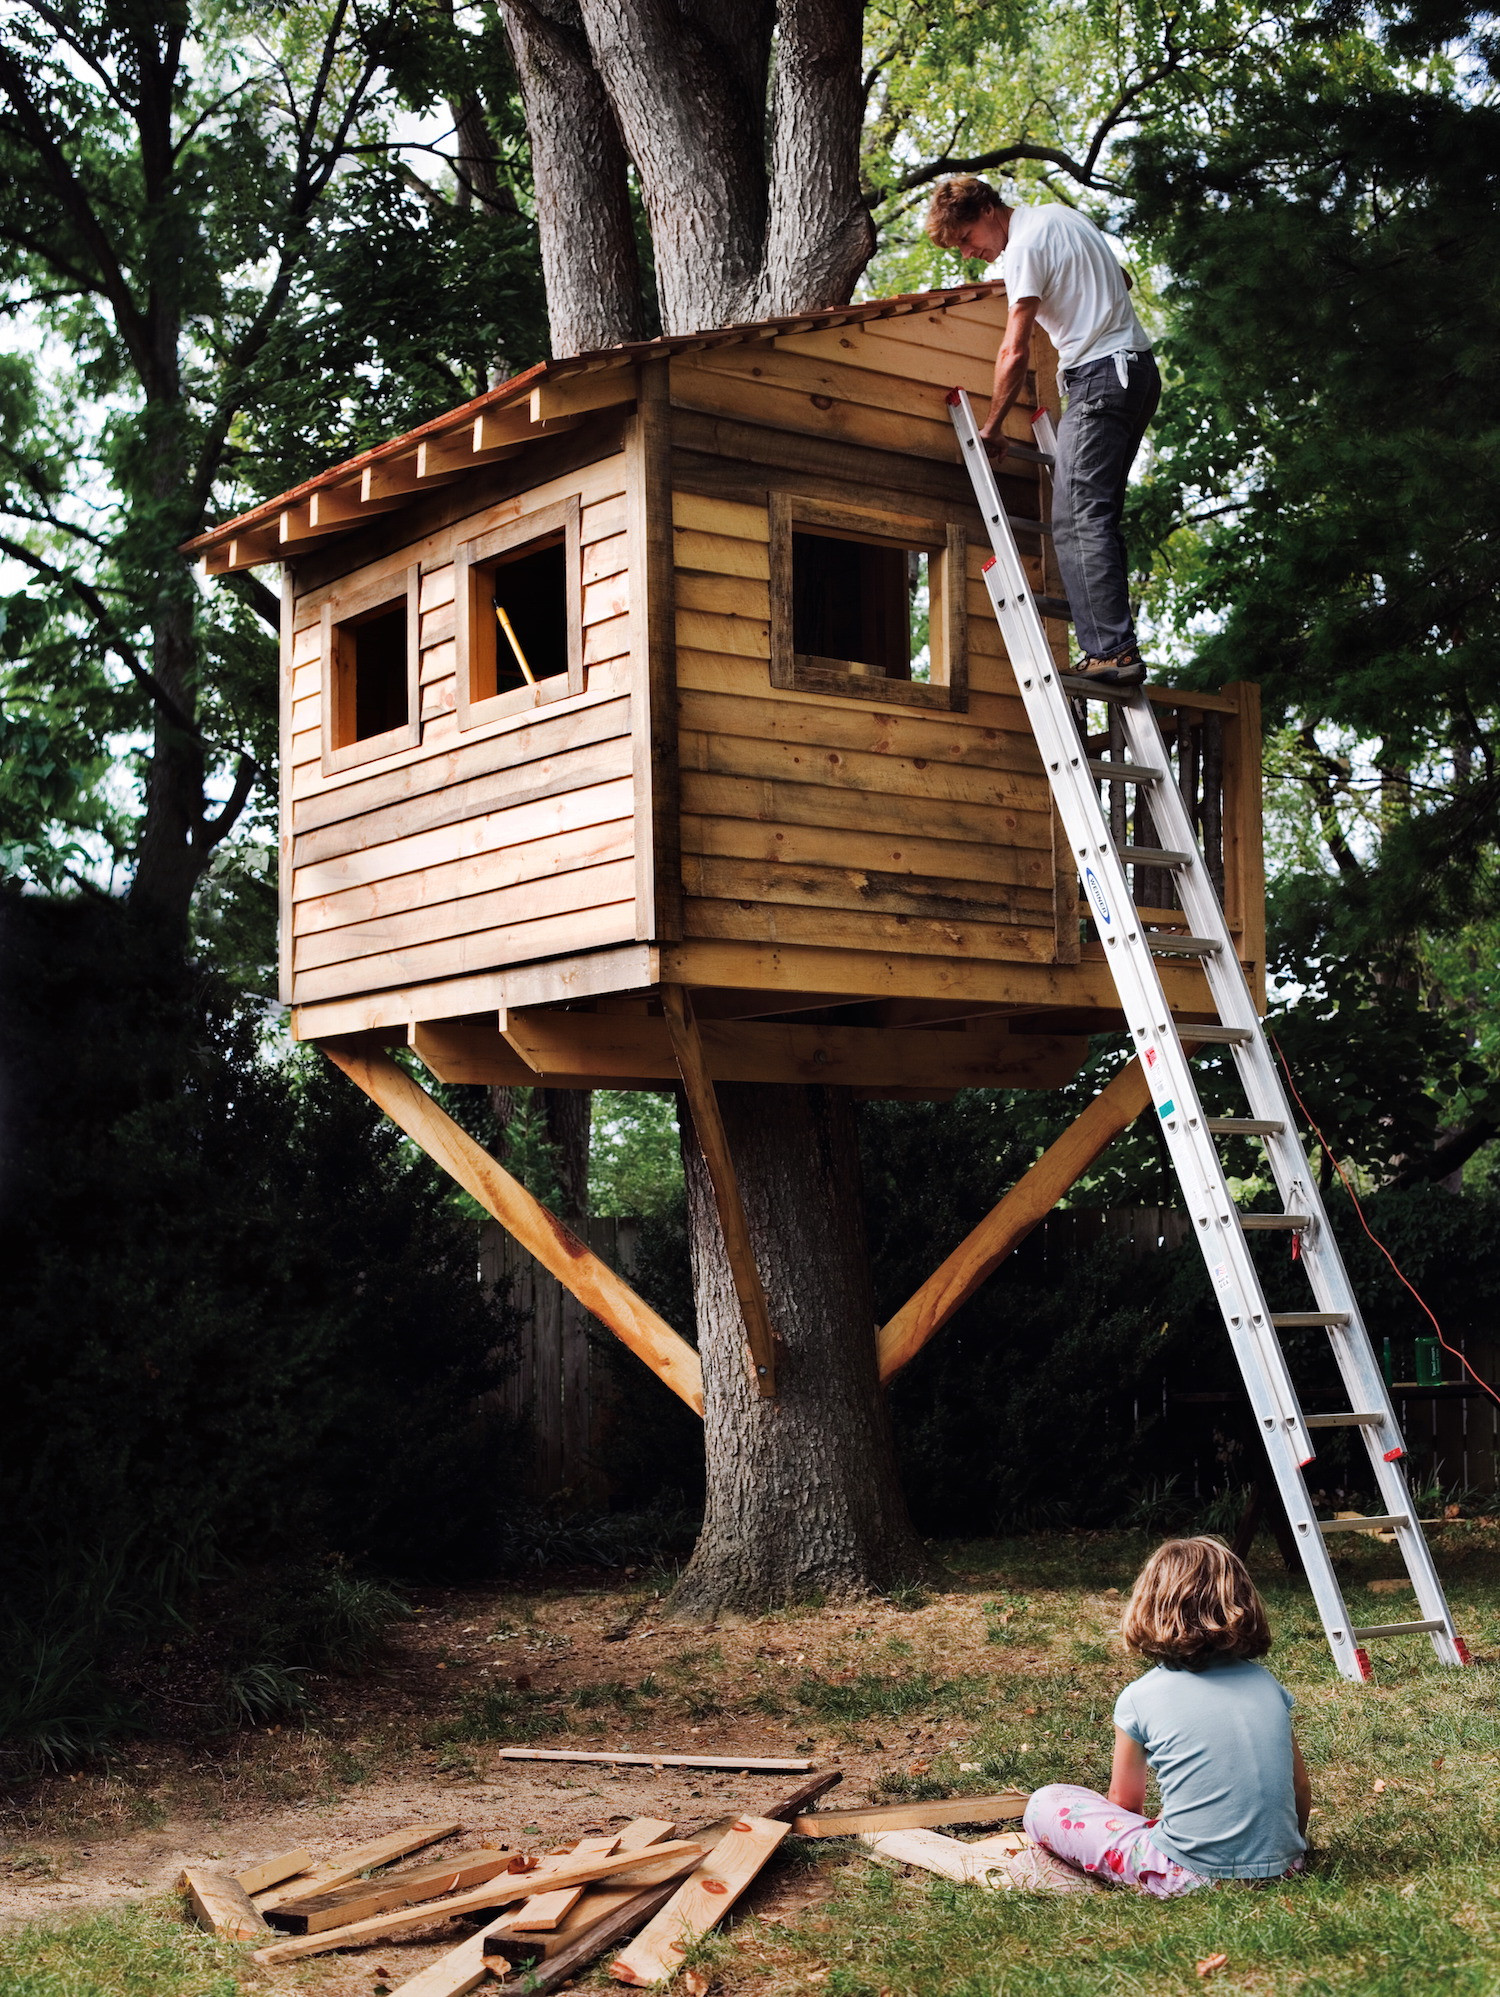 DIY Treehouse Plans
 How to Build a Treehouse for Your Backyard DIY Tree